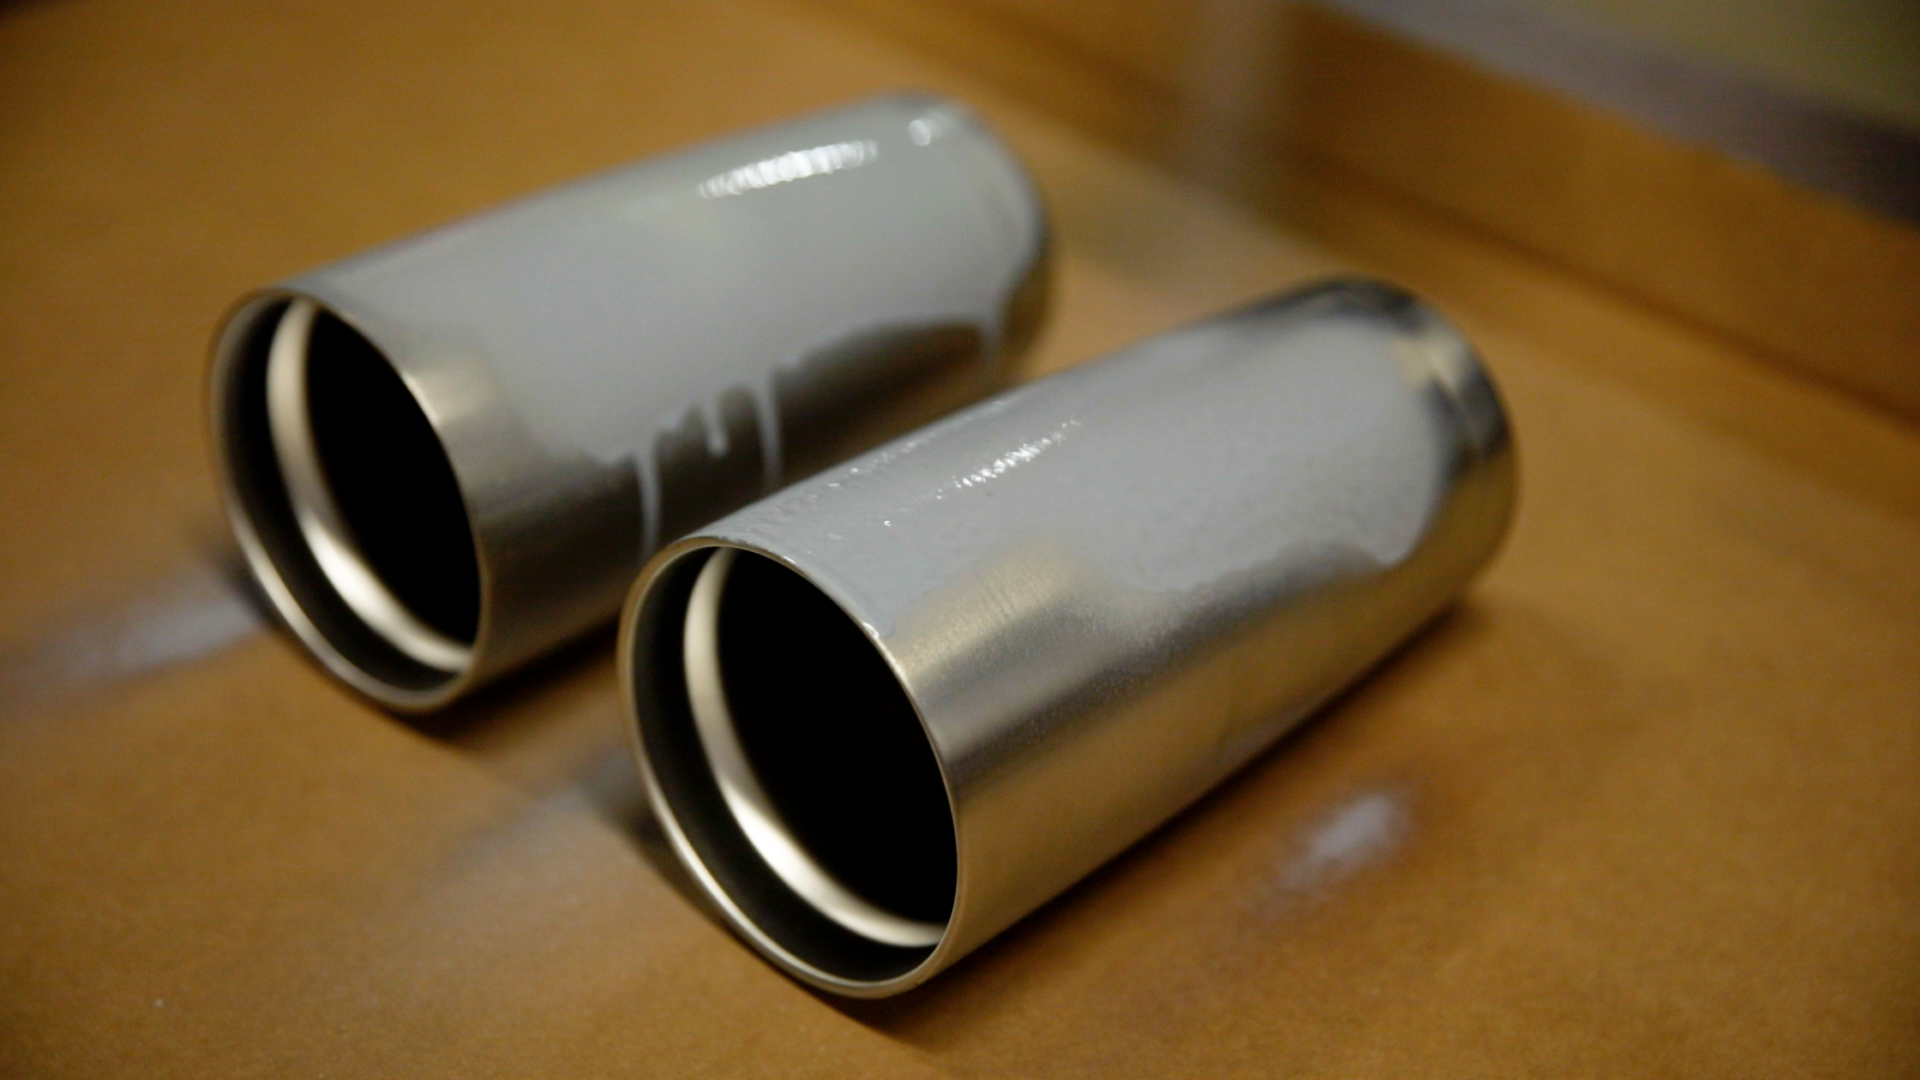 Stainless steel tumblers coated with metal marking compound